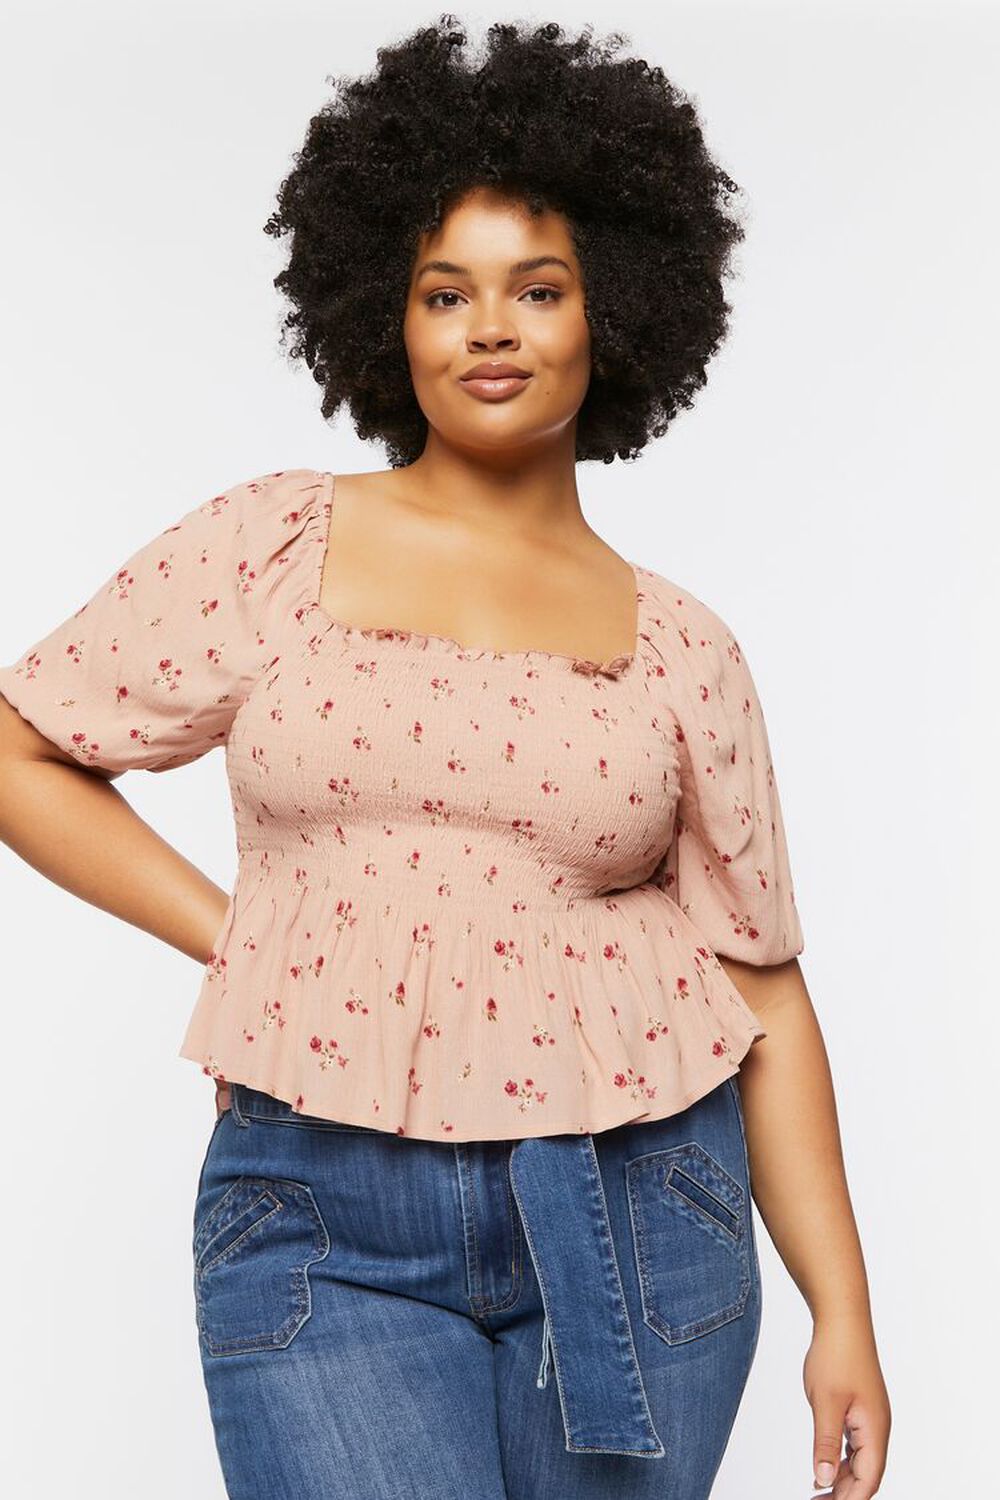 Cottage Core Top - Rose